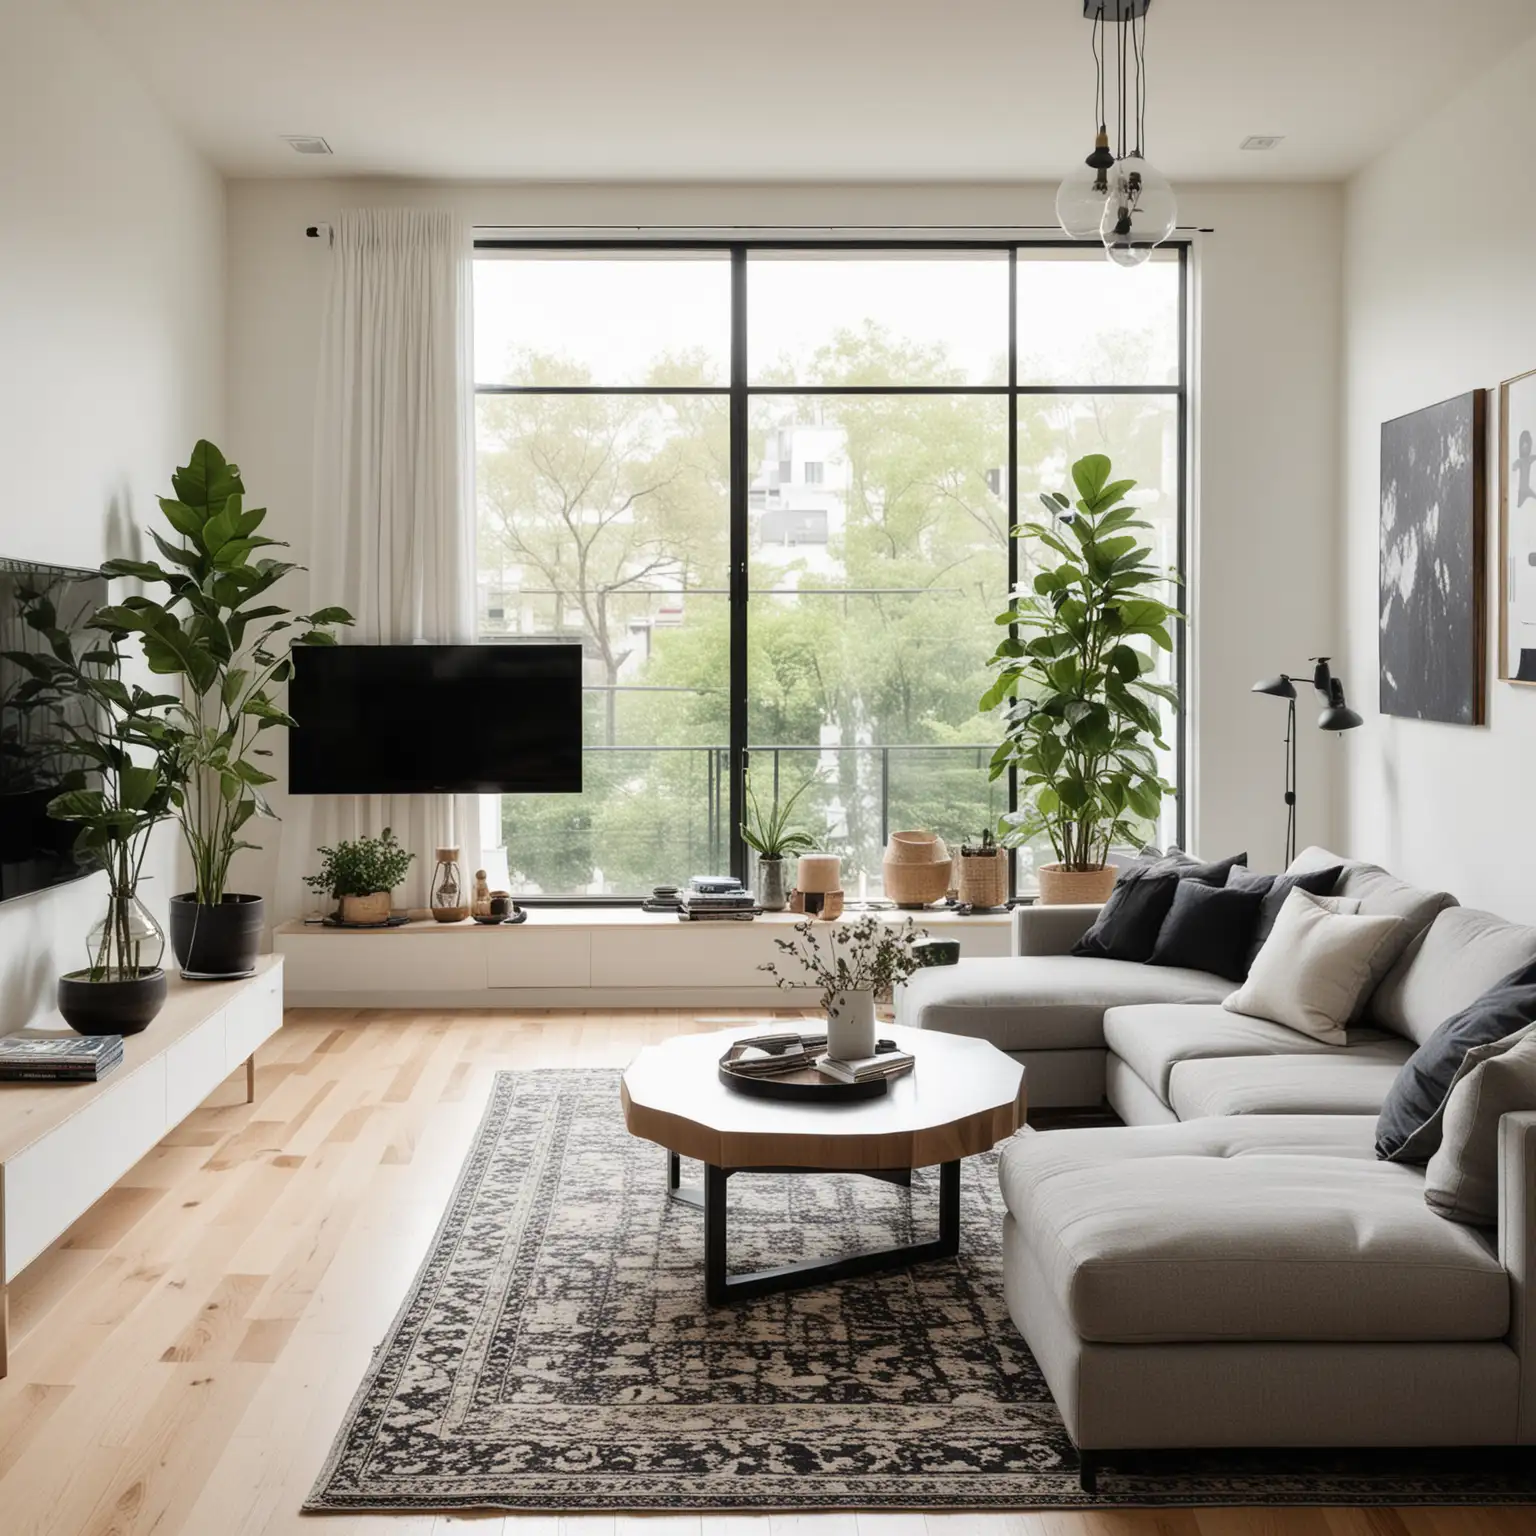 Minimalist-Modern-Living-Room-with-Grey-Sectional-Couch-and-Abstract-Art